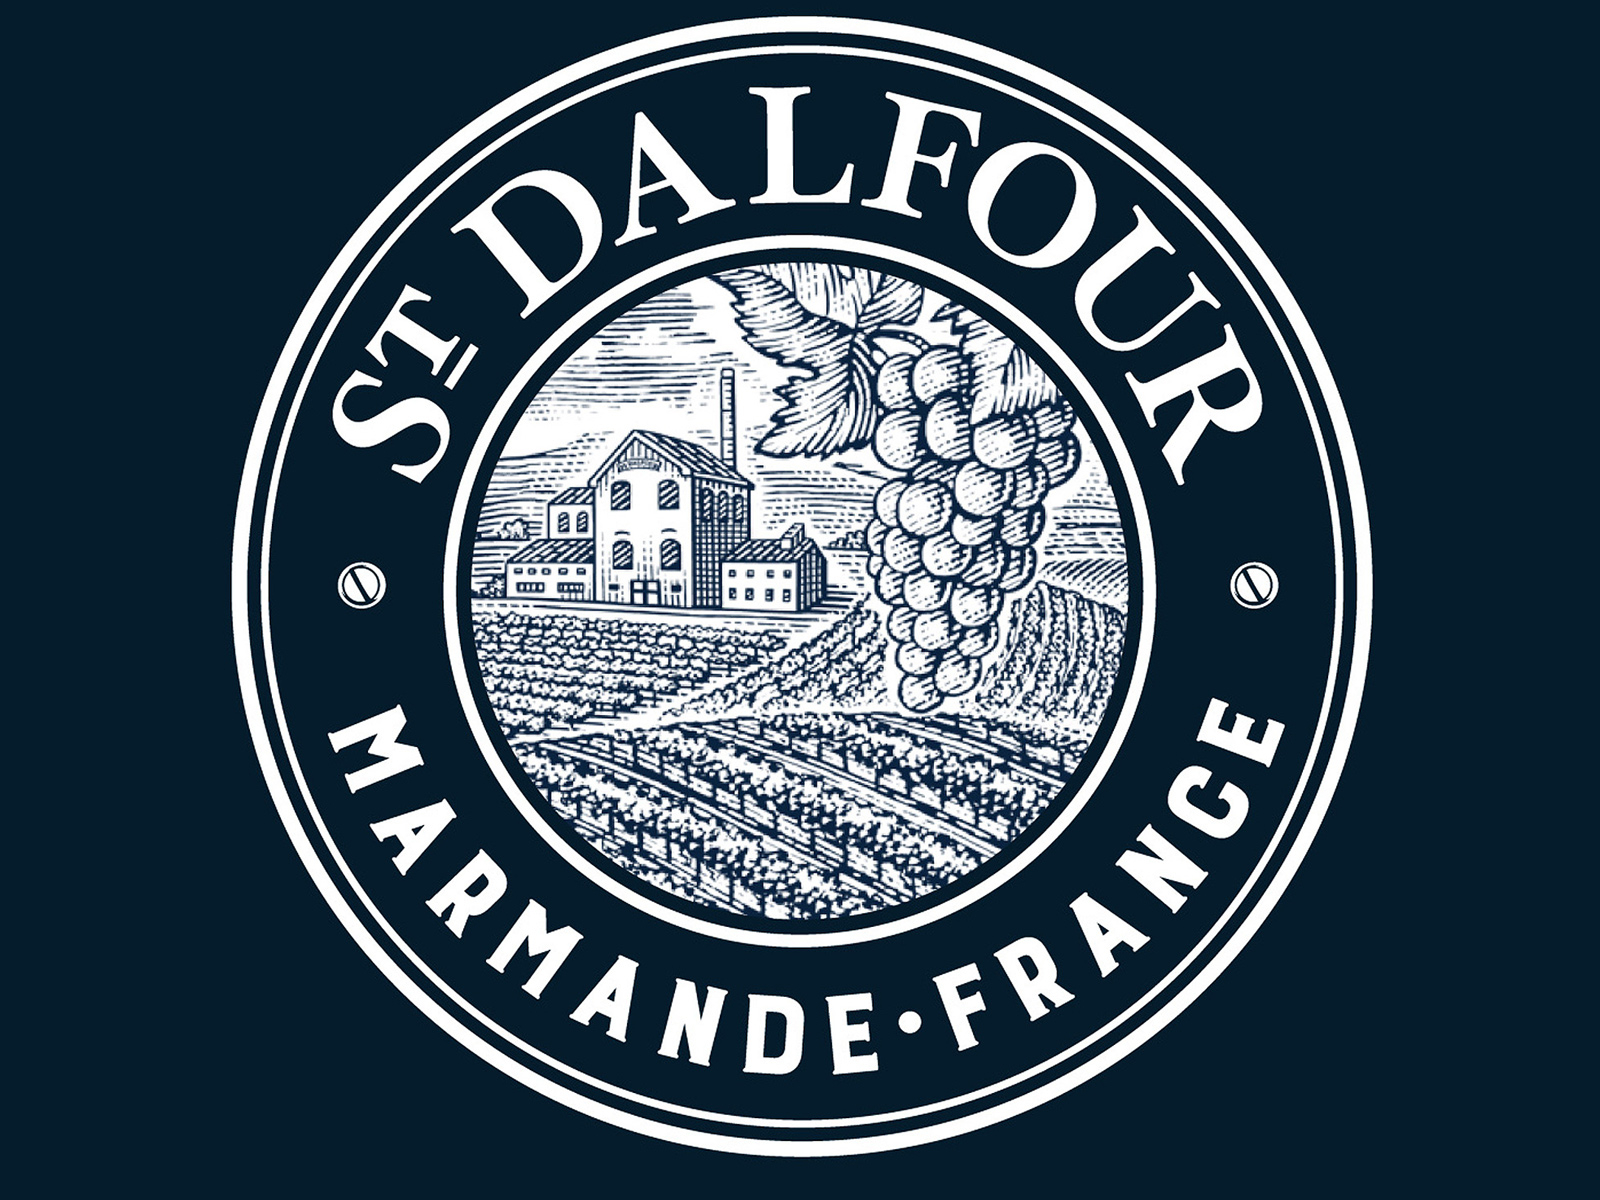 St Dalfour logo by Steven Noble on Dribbble